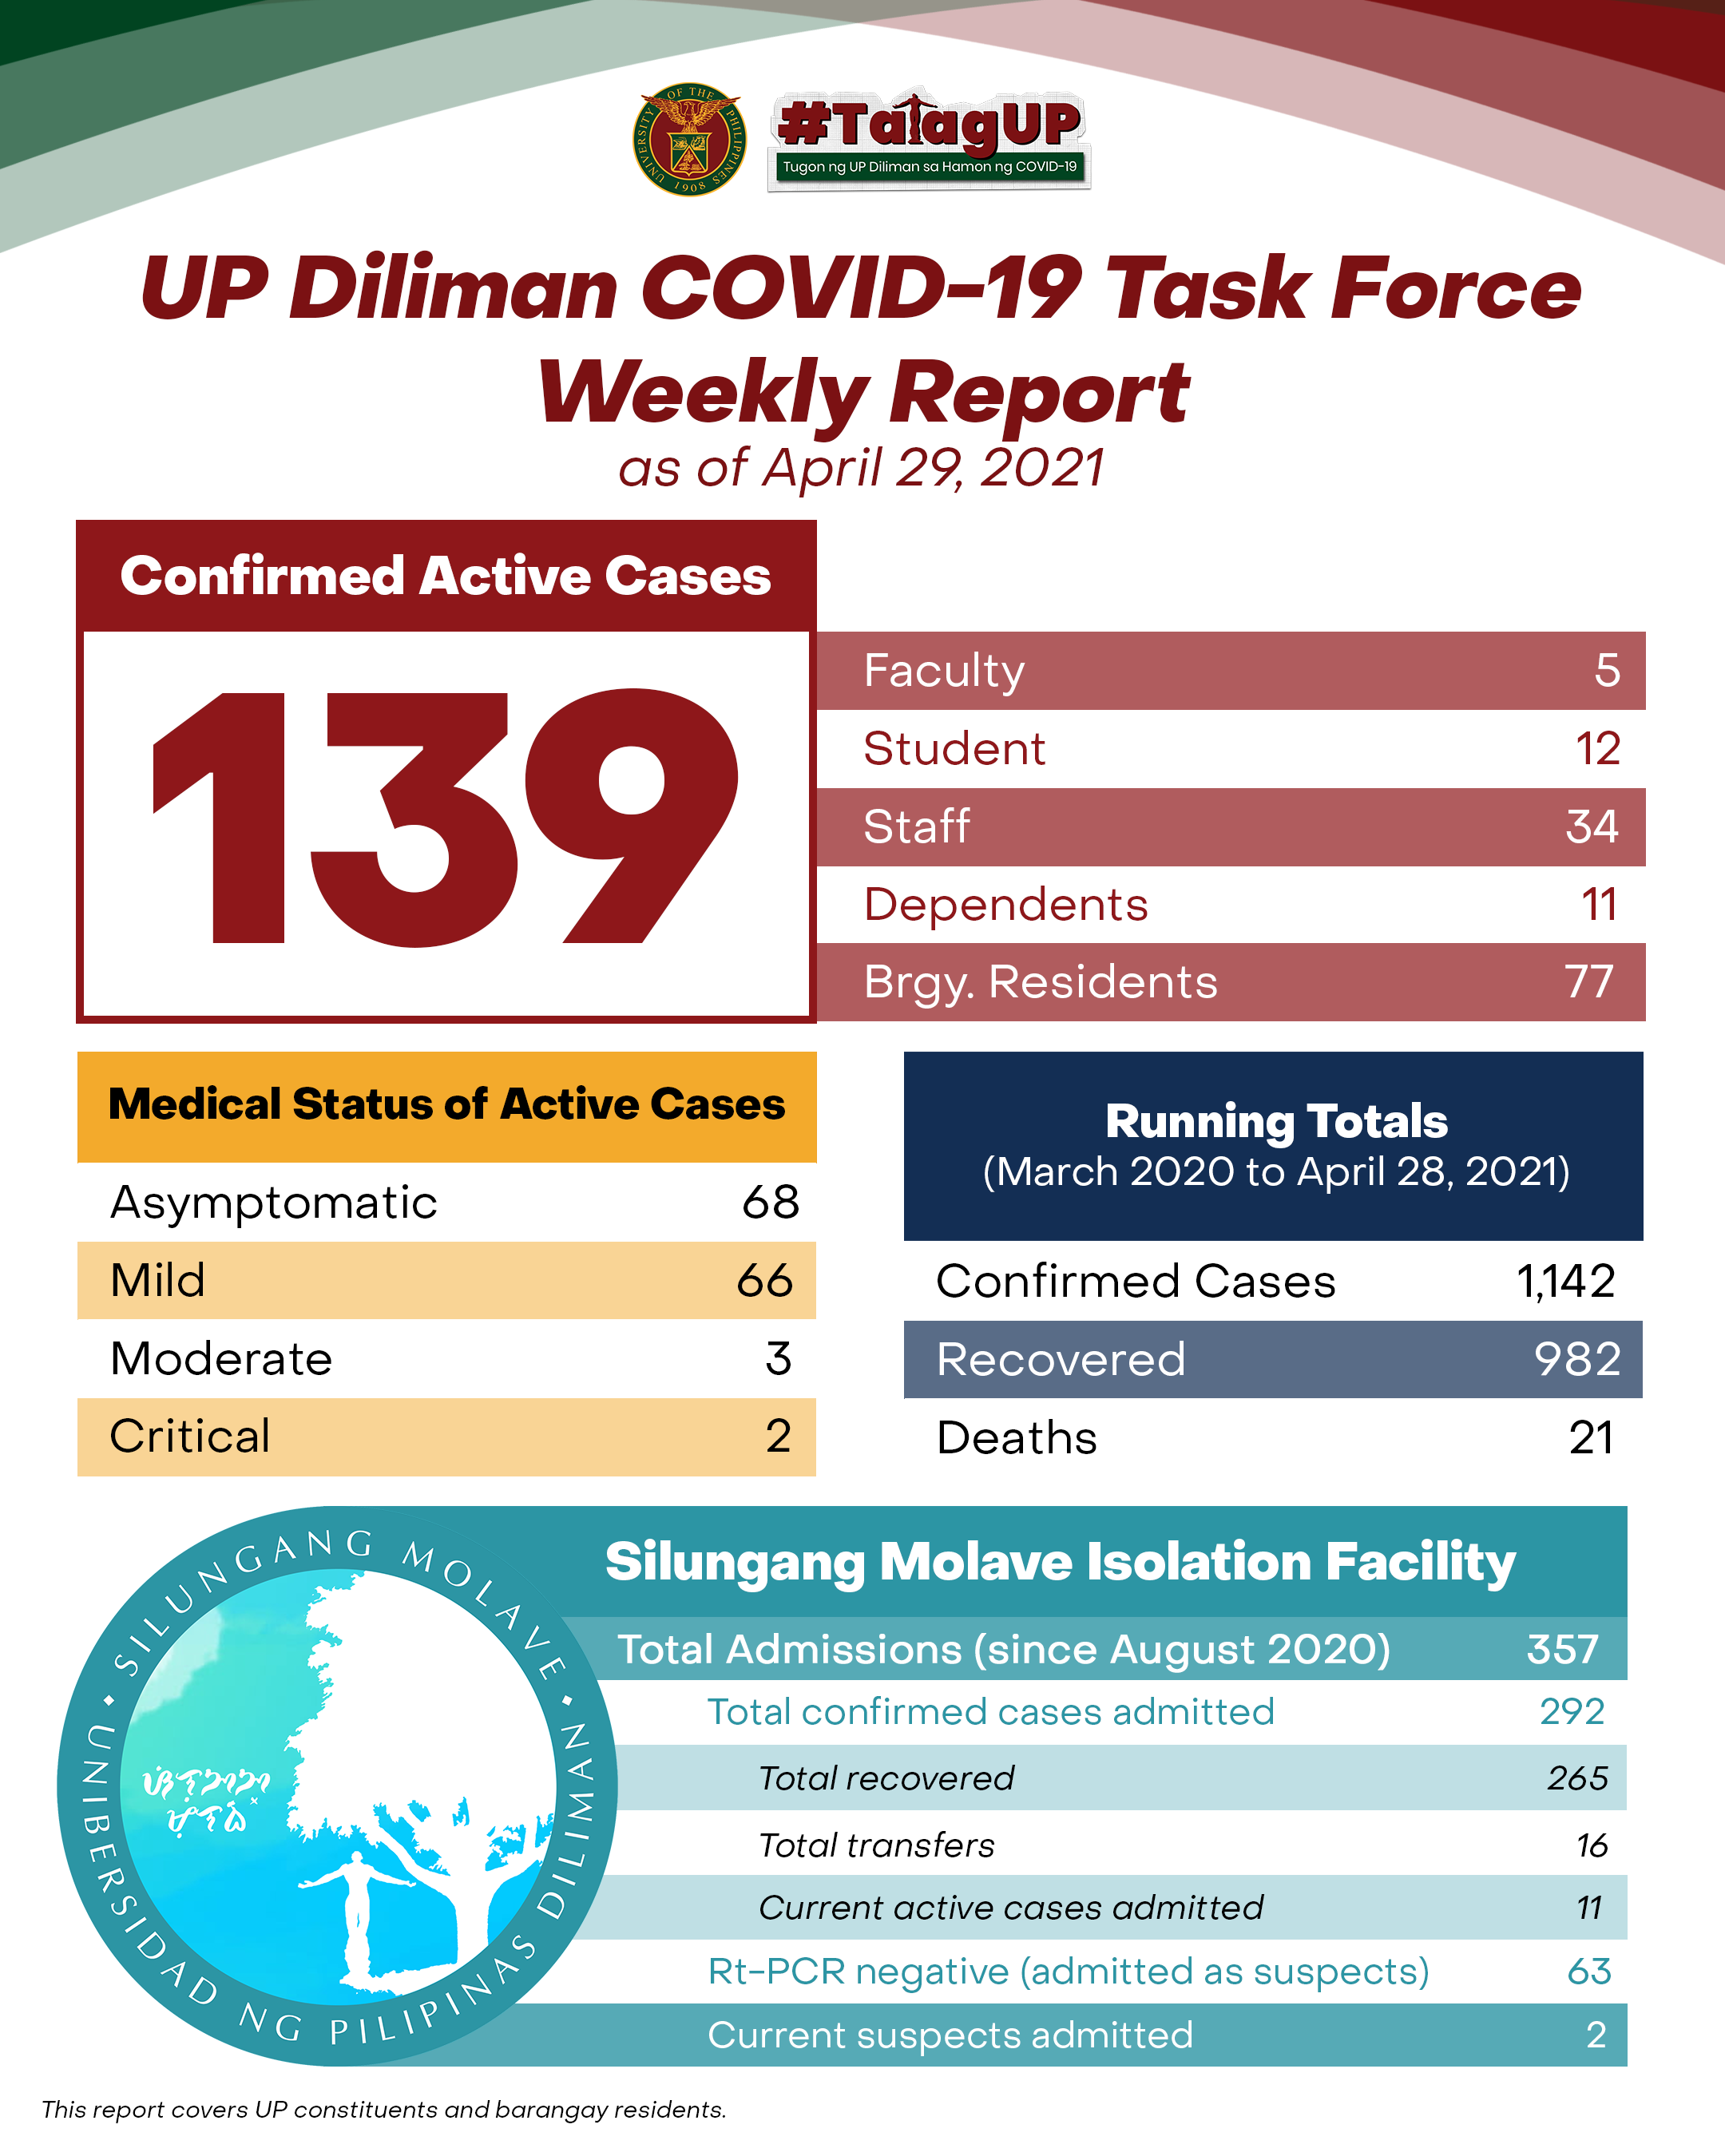 UP Diliman COVID-19 Task Force Weekly Report as of April 29, 2021